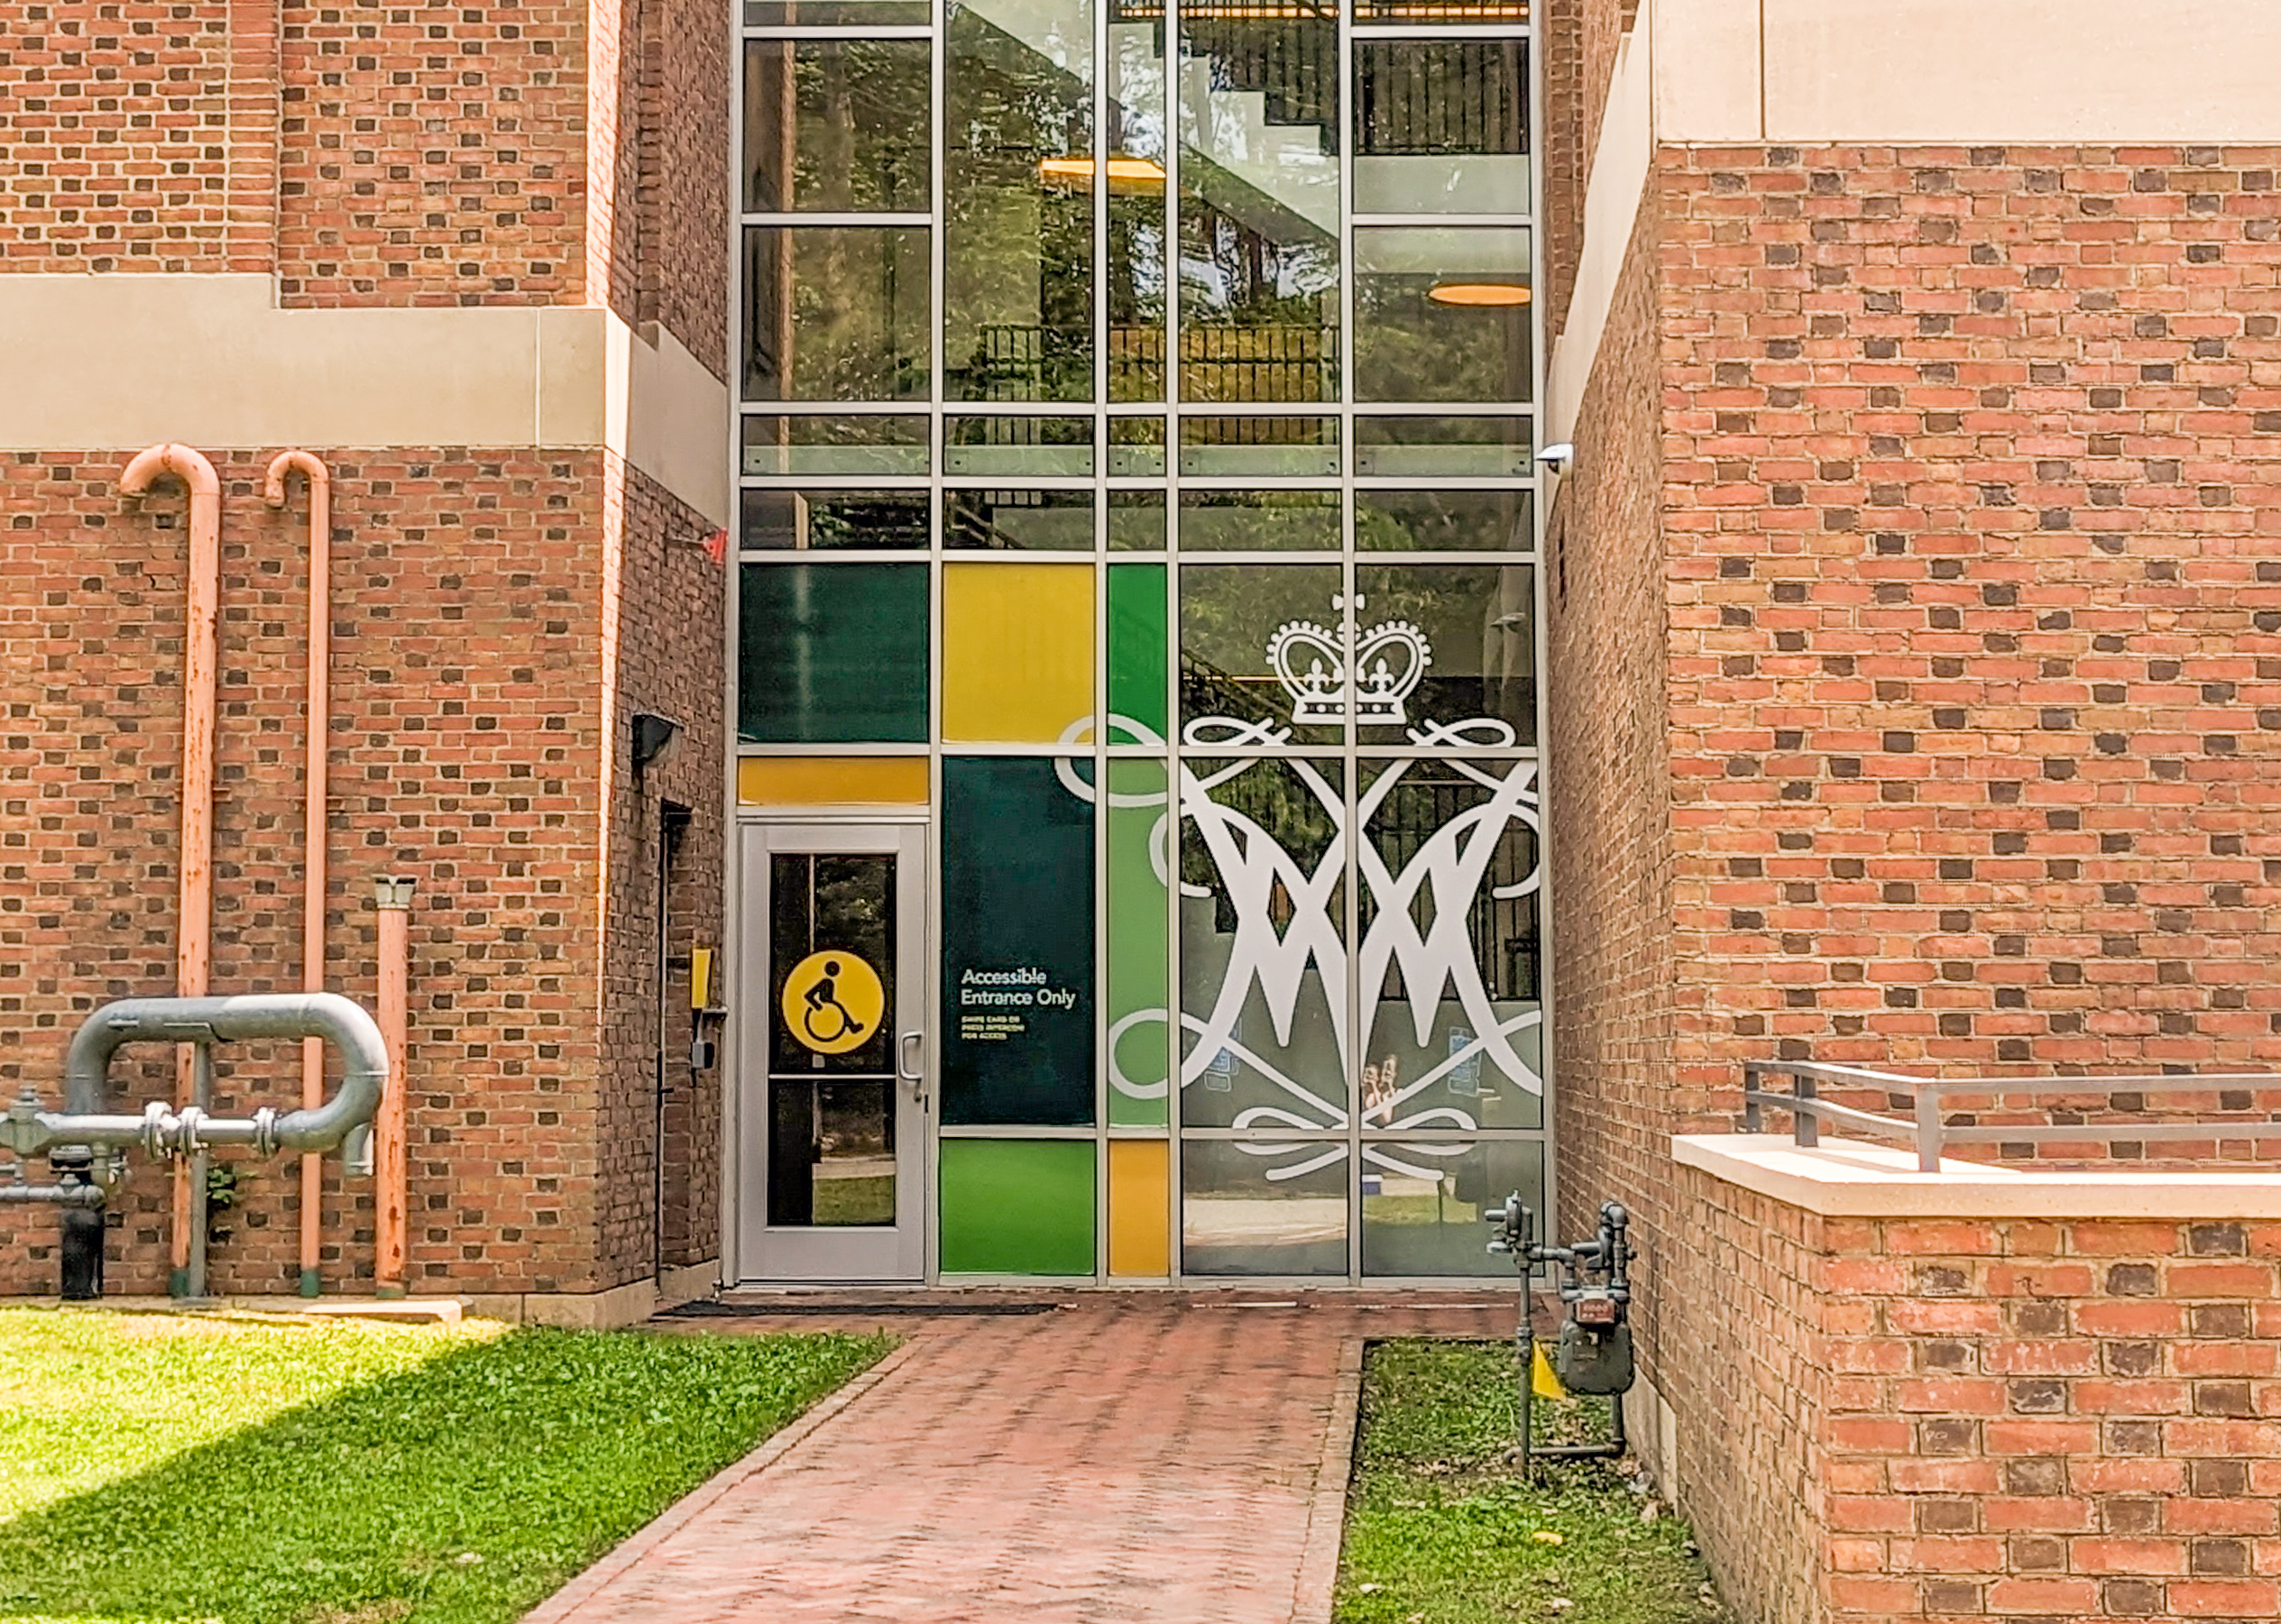 The accessible entrance on the back of Swem has a large white WM cypher and green and yellow graphics